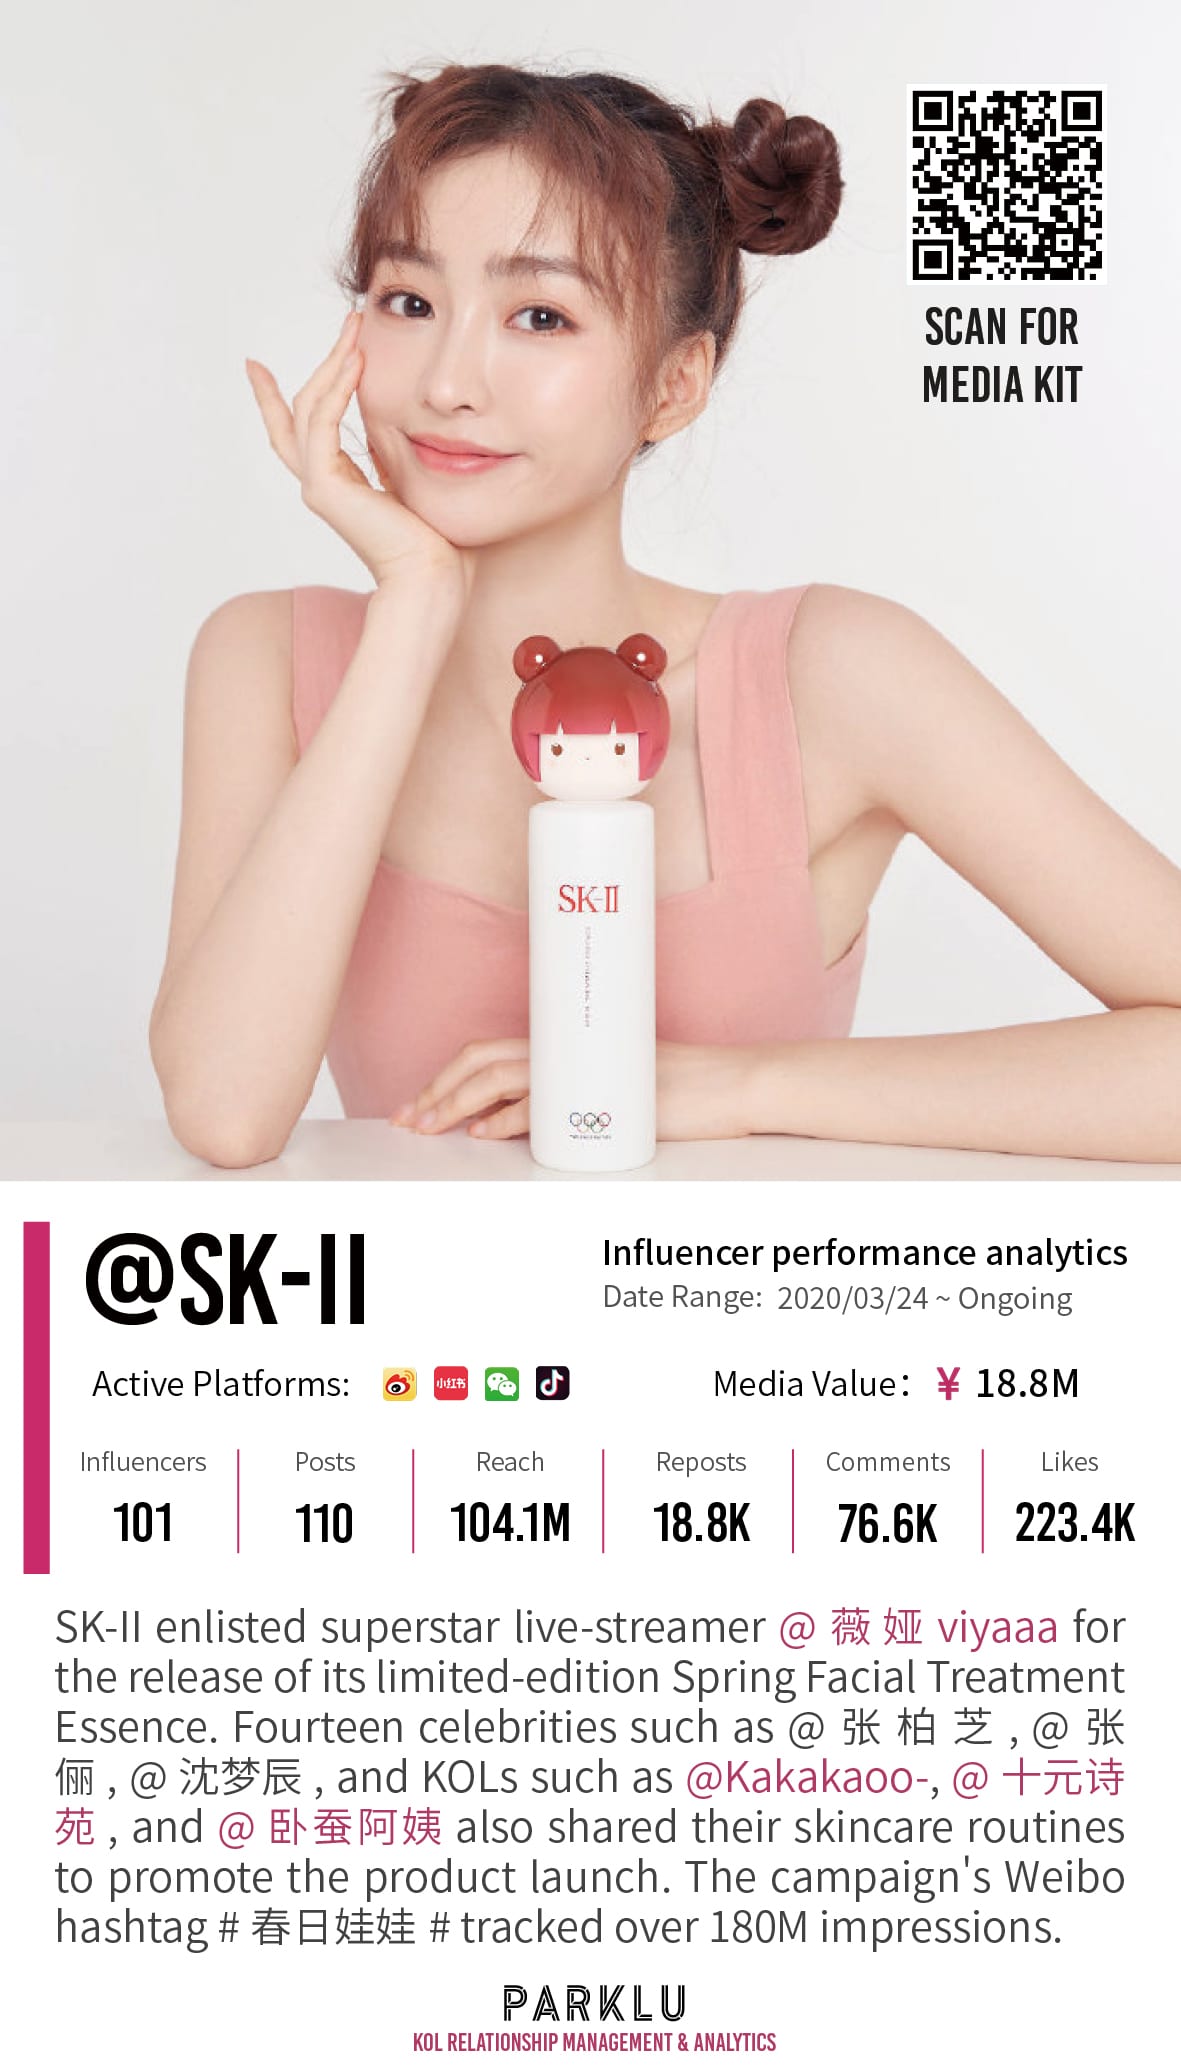 SK-II Limited-edition Spring Facial Treatment Essence